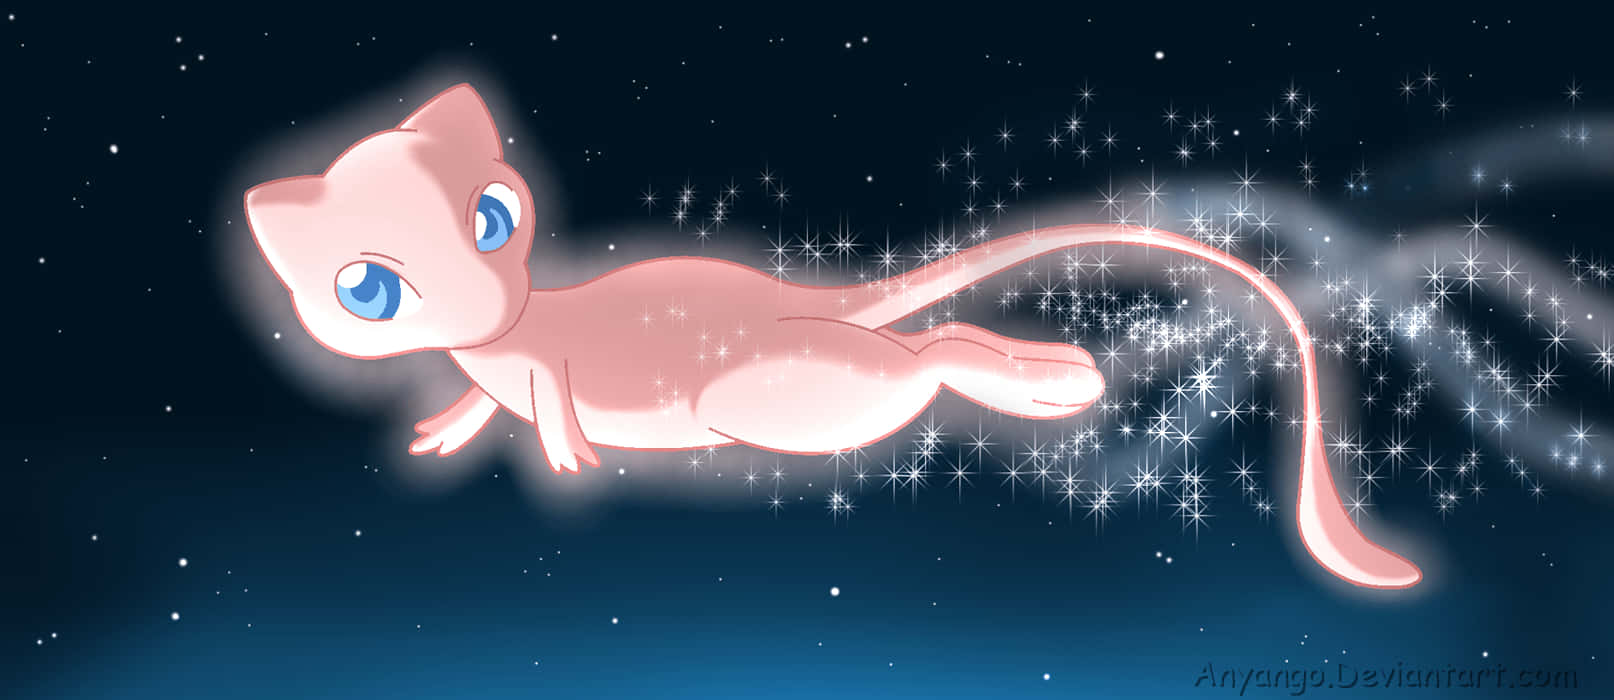 A Pink Cat Flying In The Sky With Stars Wallpaper